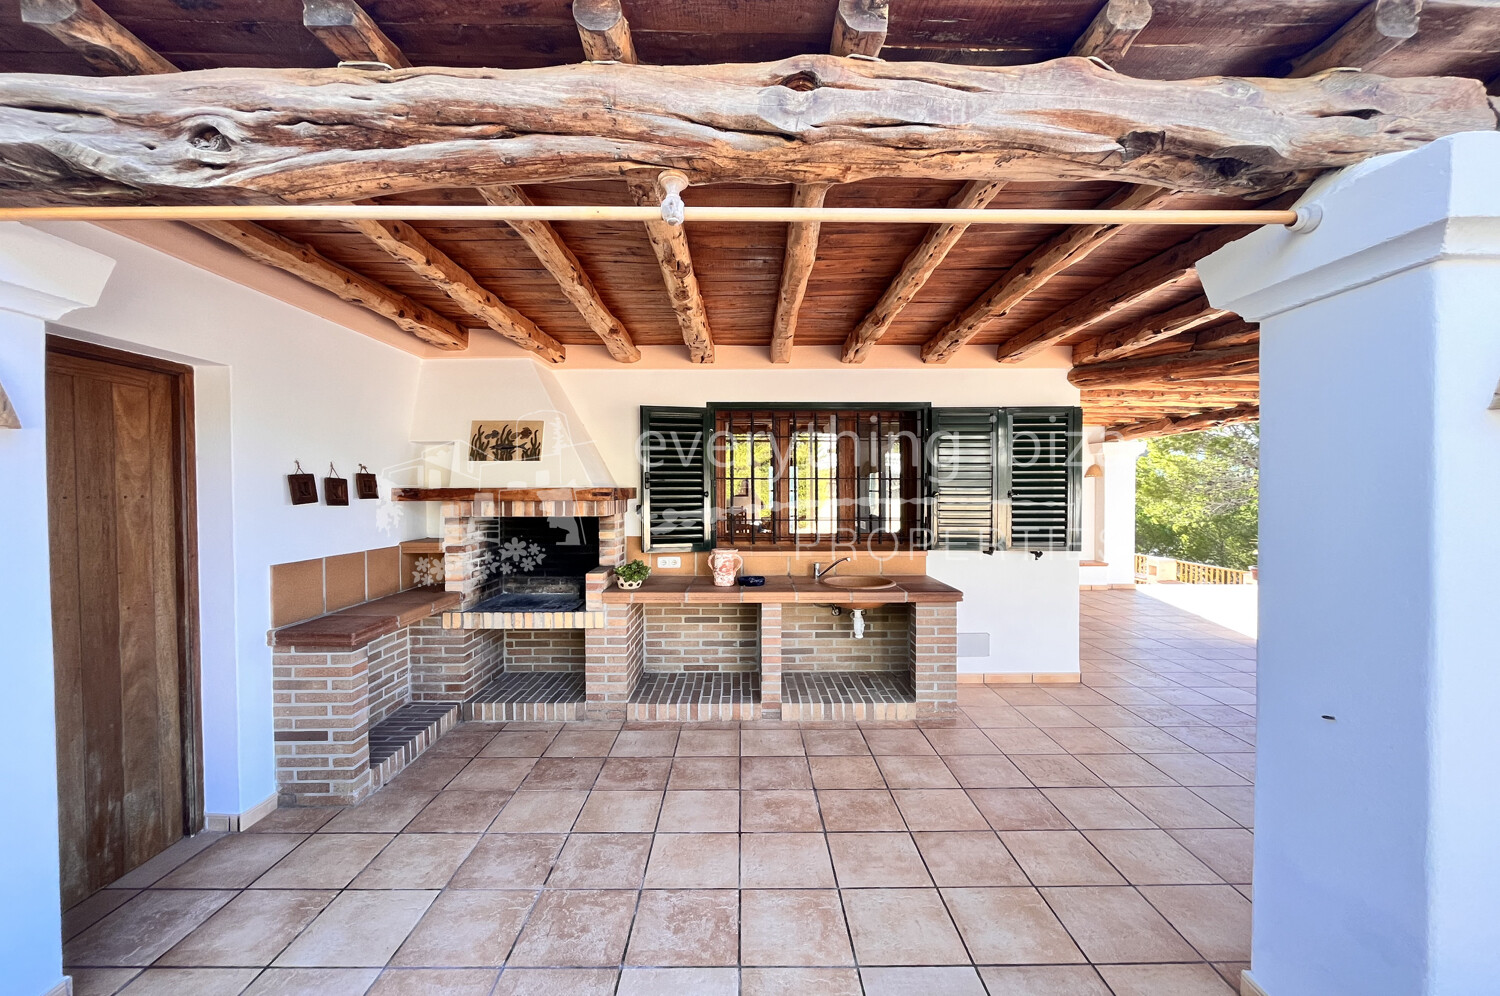 Villa with Tourist License Enjoying Fantastic Sea and Sunset Views in Cala Vadella, ref. 1639, for sale in Ibiza by everything ibiza Properties